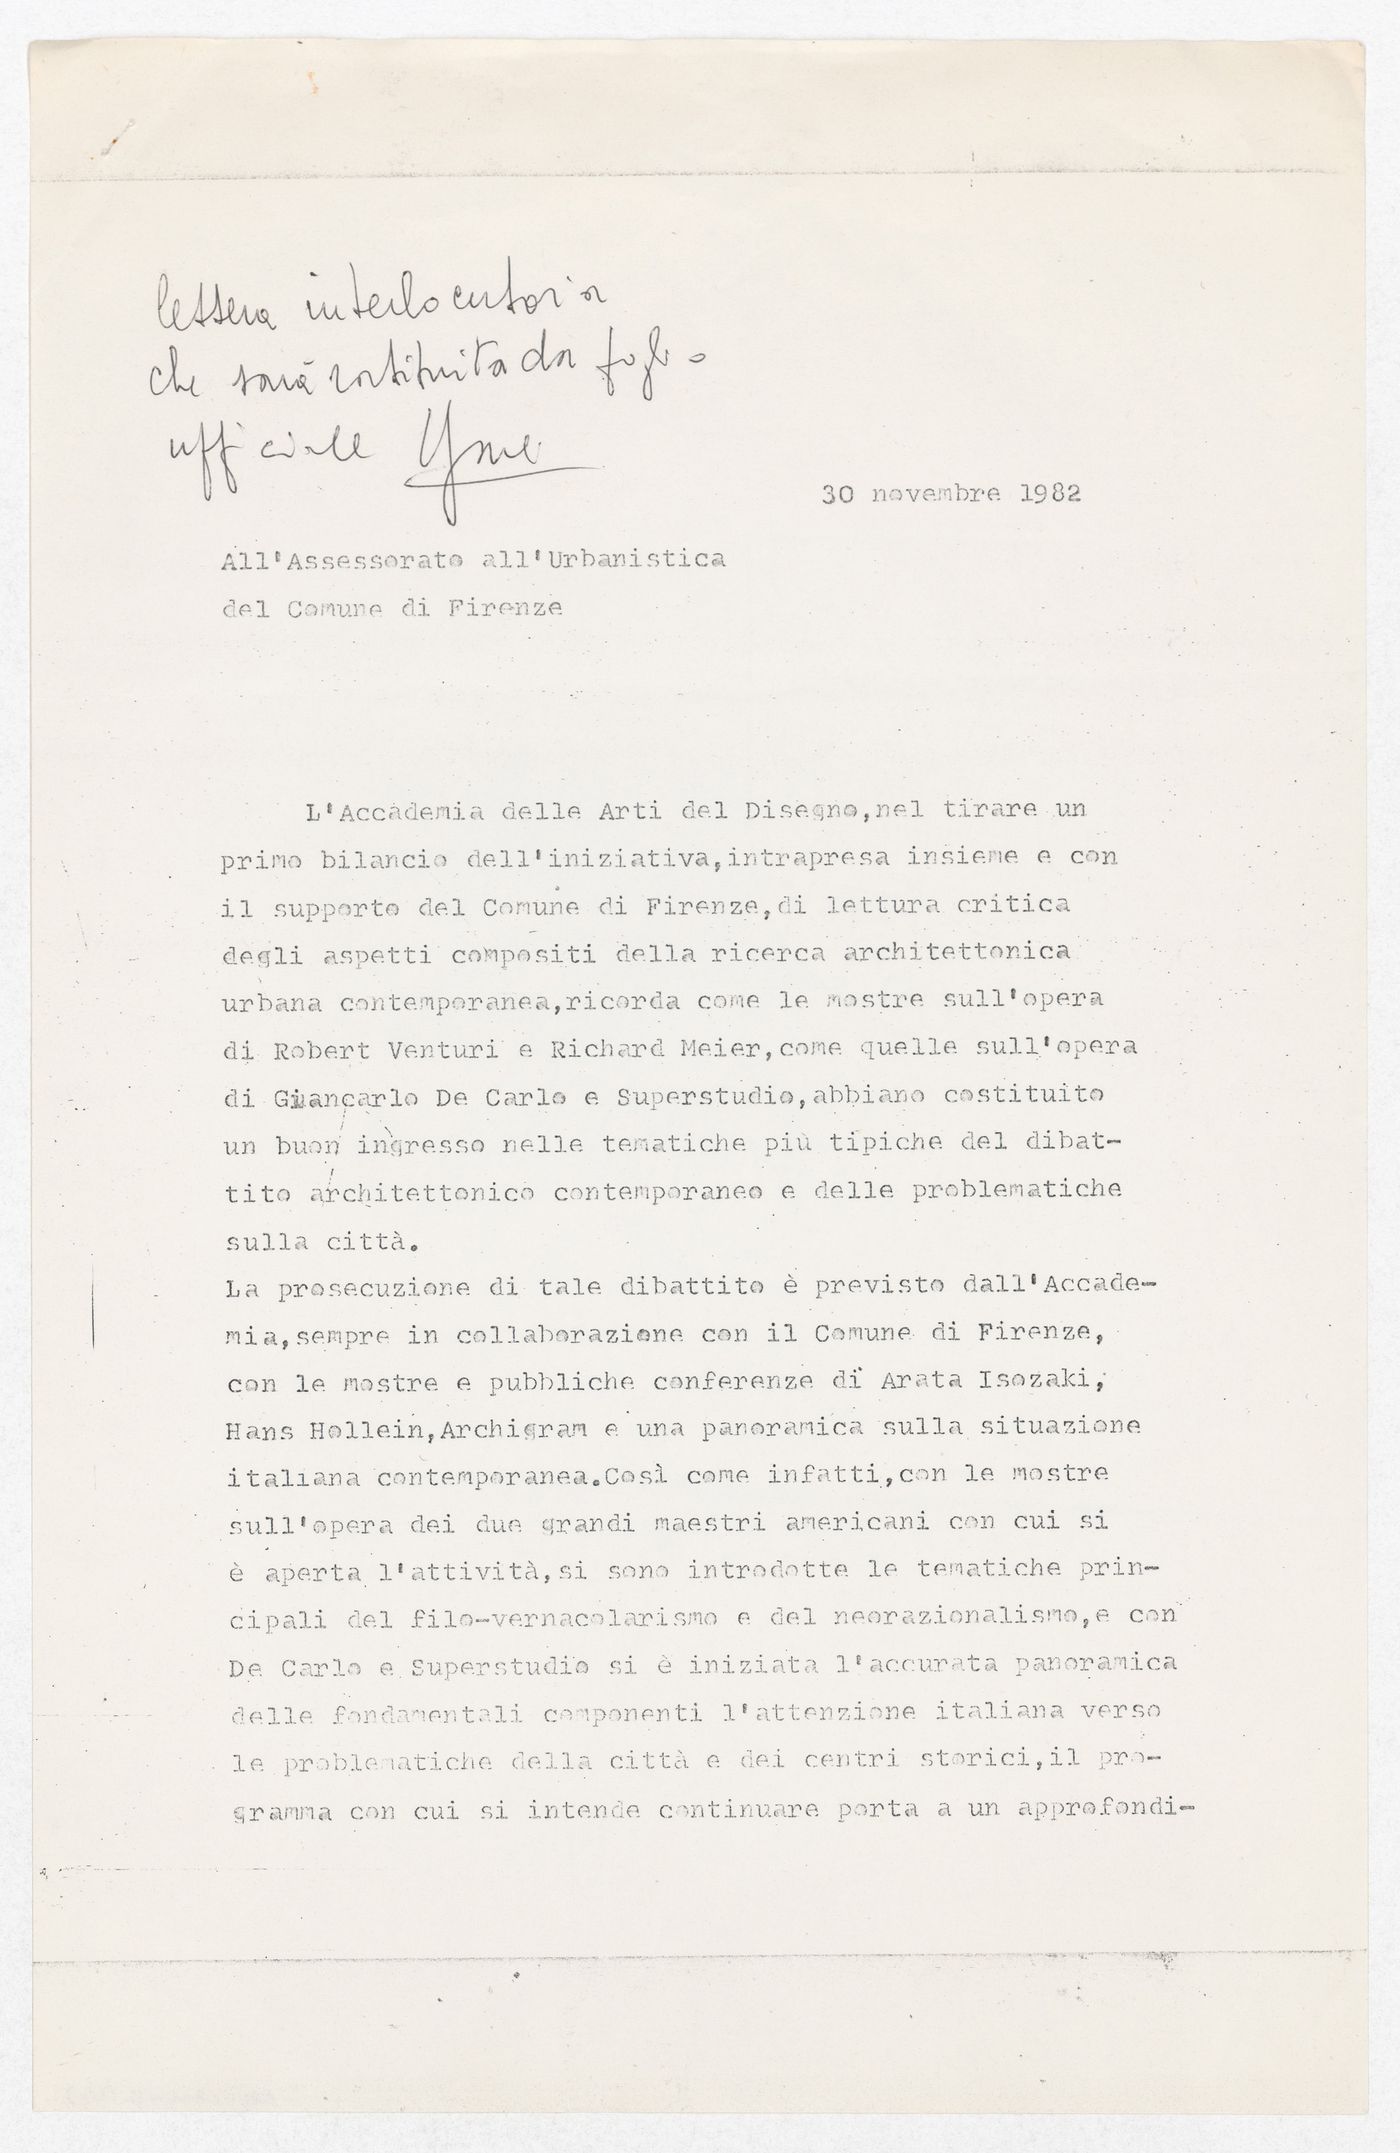 Correspondence to the Town Planning Department of Florence from the President of the Accademia delle Arti del Disegno in Florence for the exhibition Hans Hollein. Opere 1960-1988